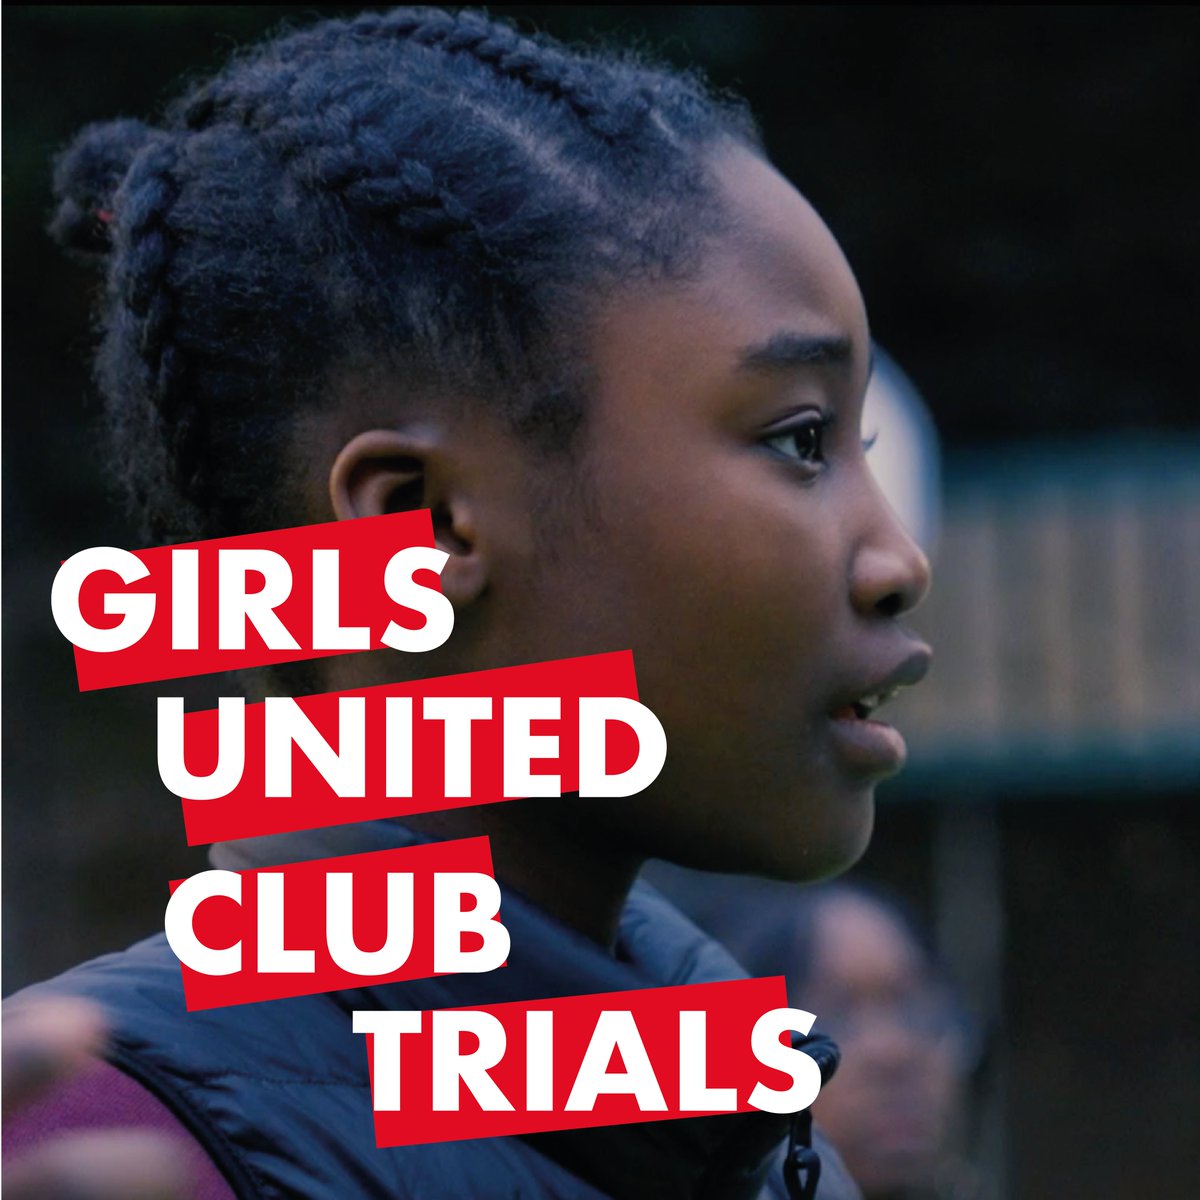 GIRLS UNITED CLUB TRIALS 2023/24 ‼️ We want you to be a part of our team and community! 🤩 Club or Development teams, spanning age groups from Under 9s to Under 16s. ⚡ Register your interest by filling out the registration form girlsunitedfa.org/club-trials-pl…